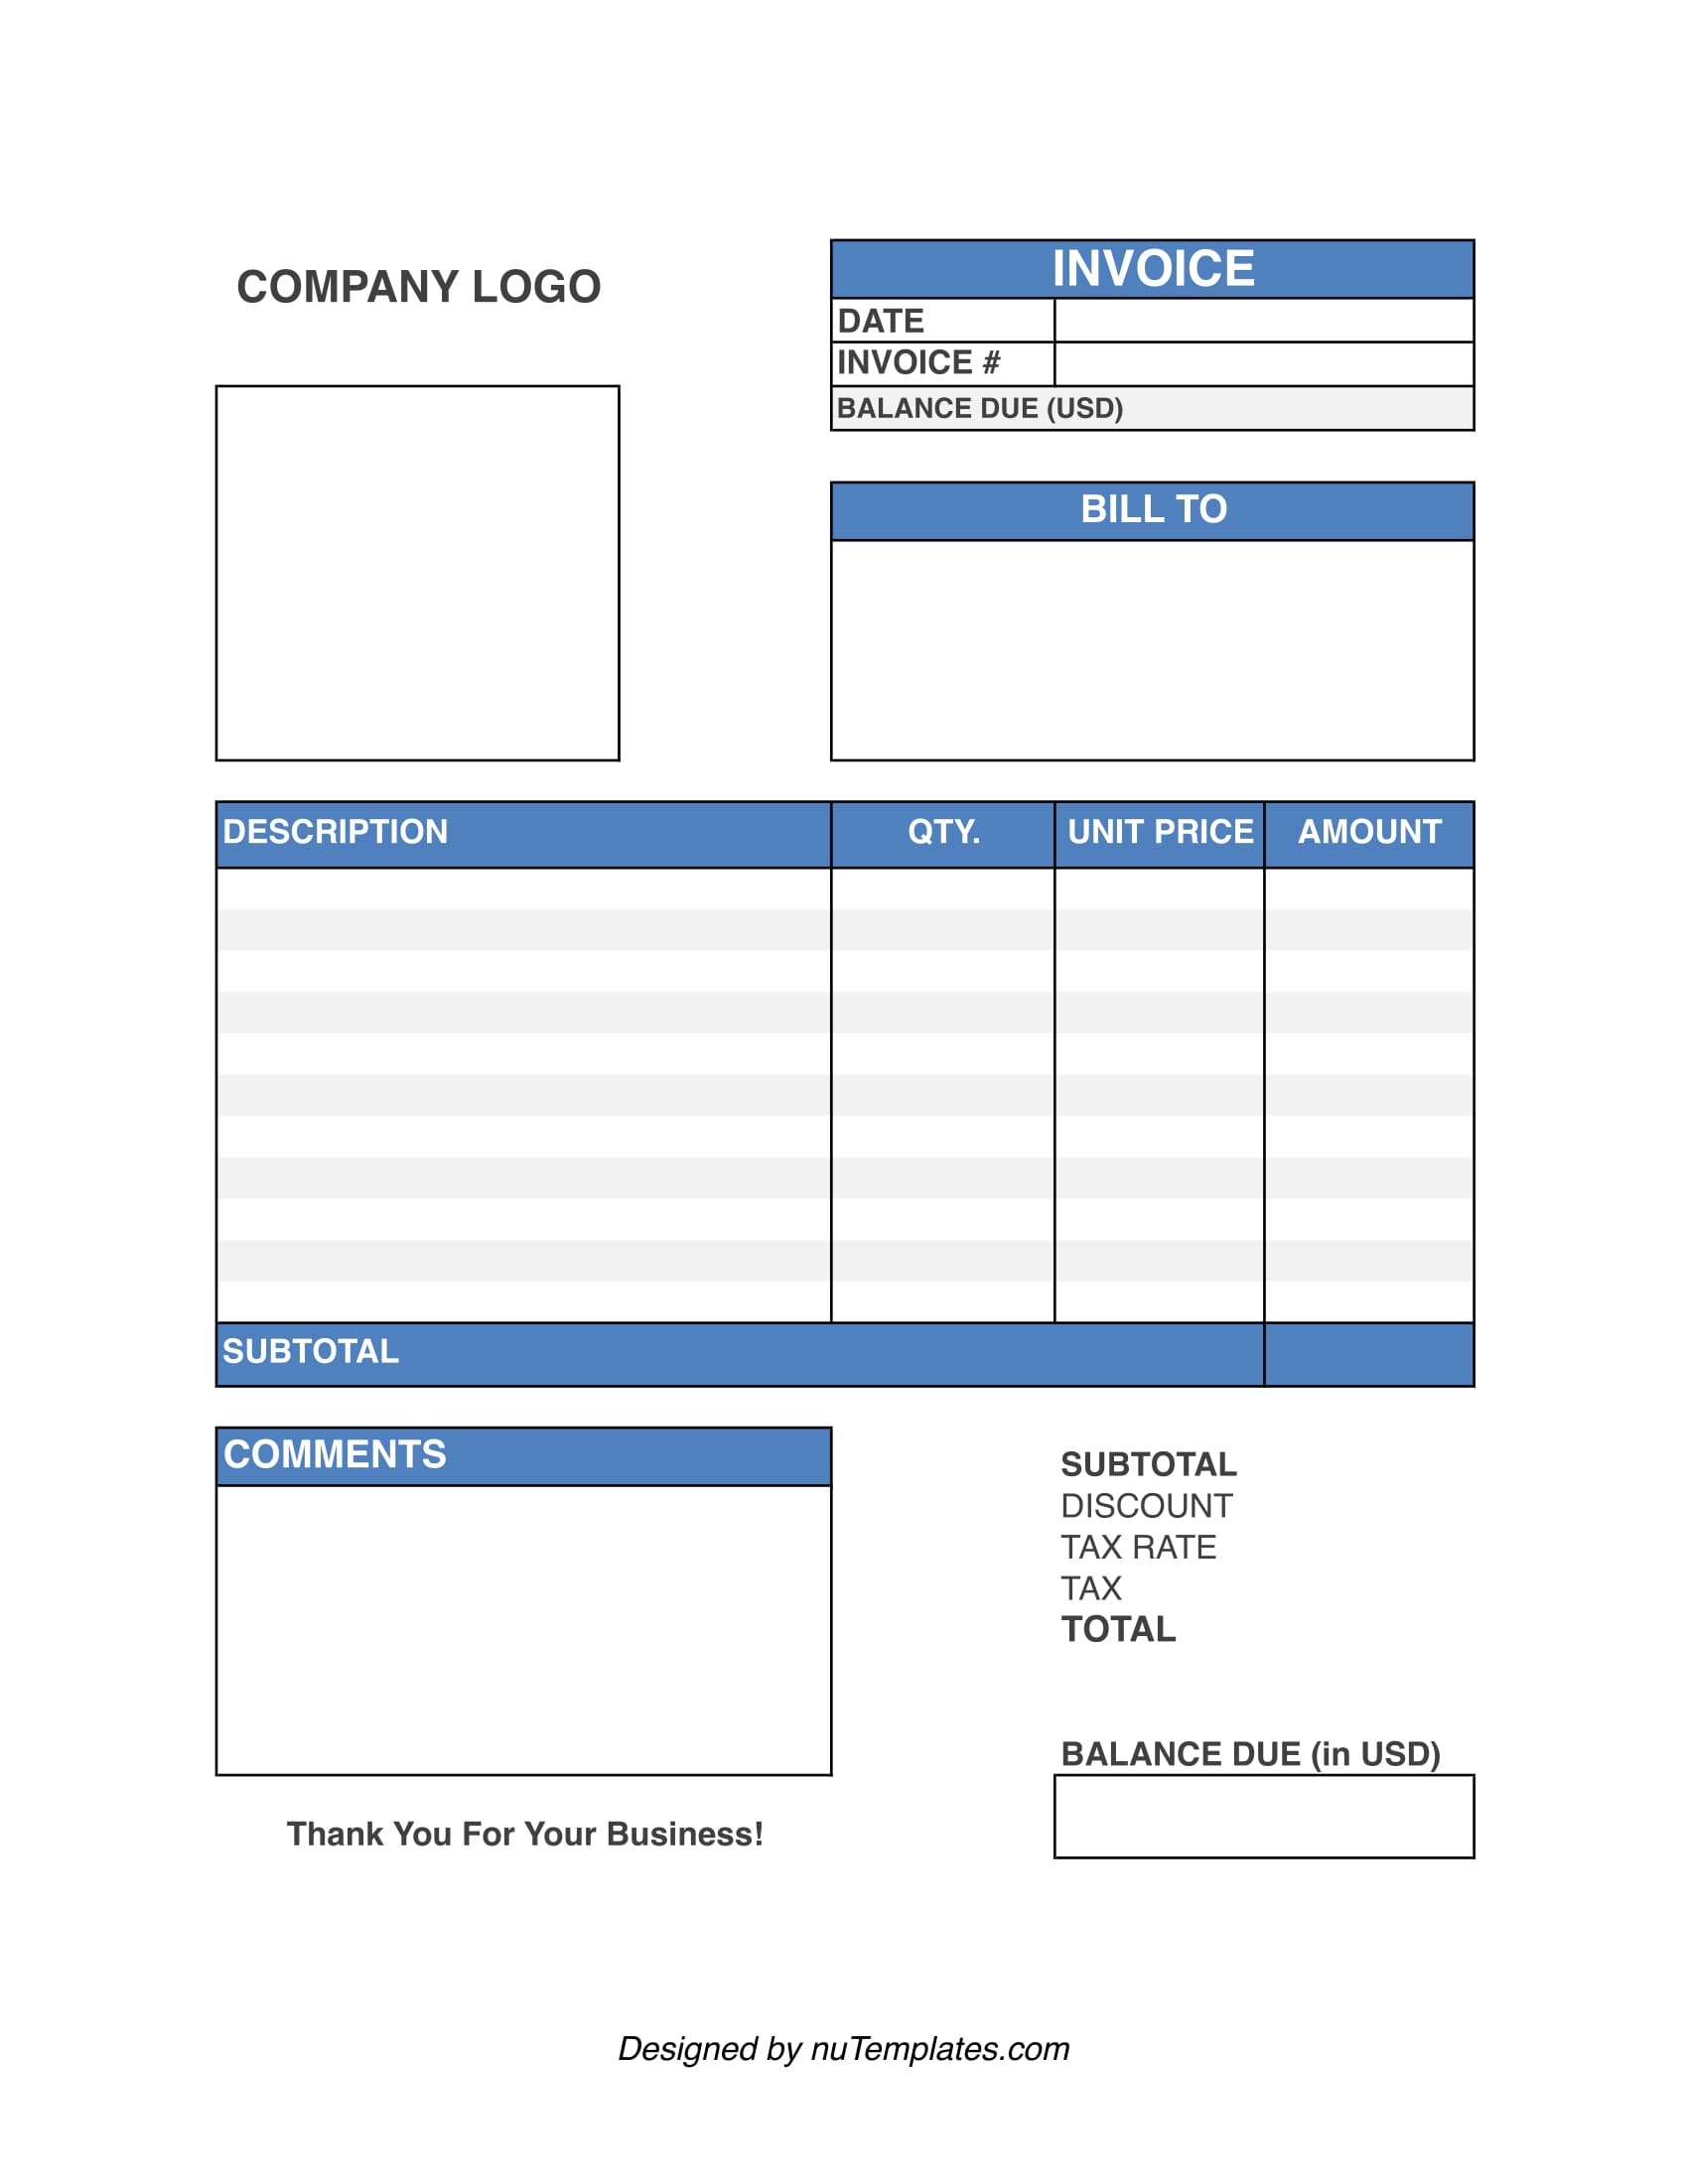 invoice templates free invoice template nutemplates